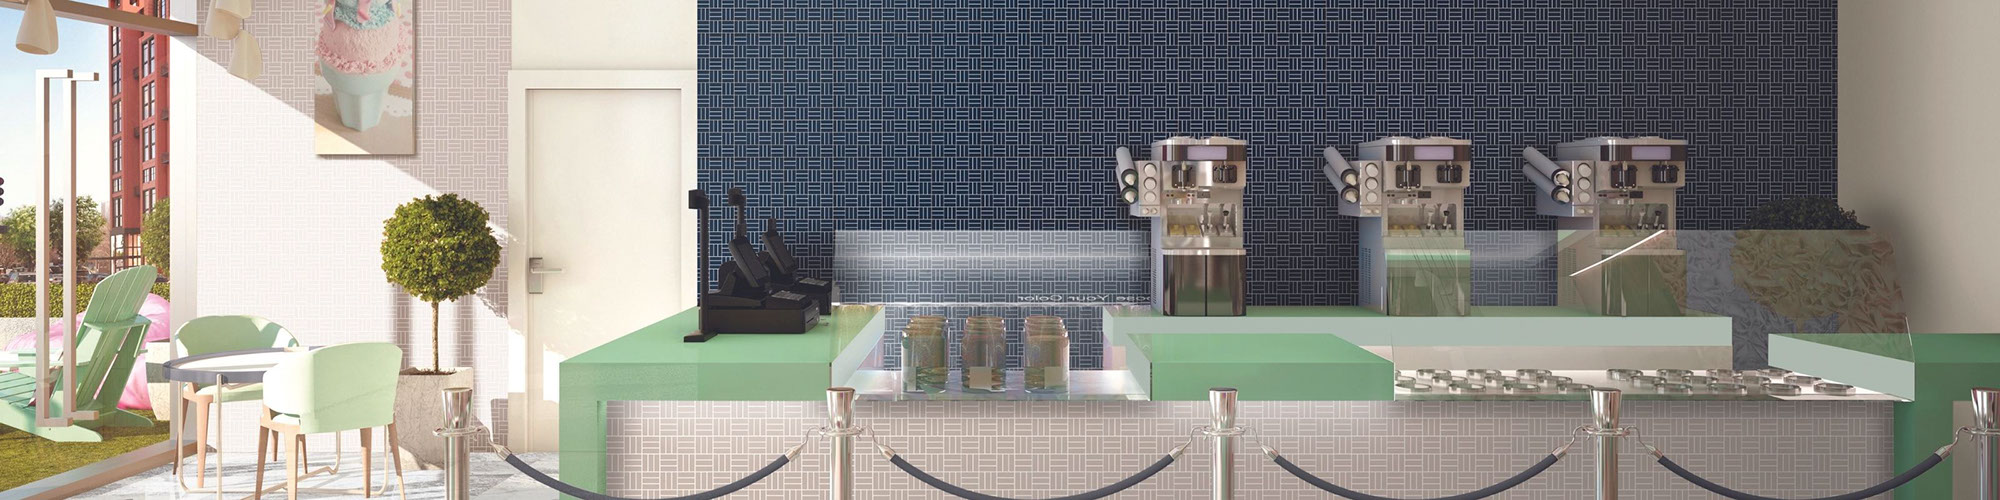 Ice cream parlor with beige mosaic wall tile, navy mosaic feature wall, mint countertop, and white & gray tables with mint chairs.